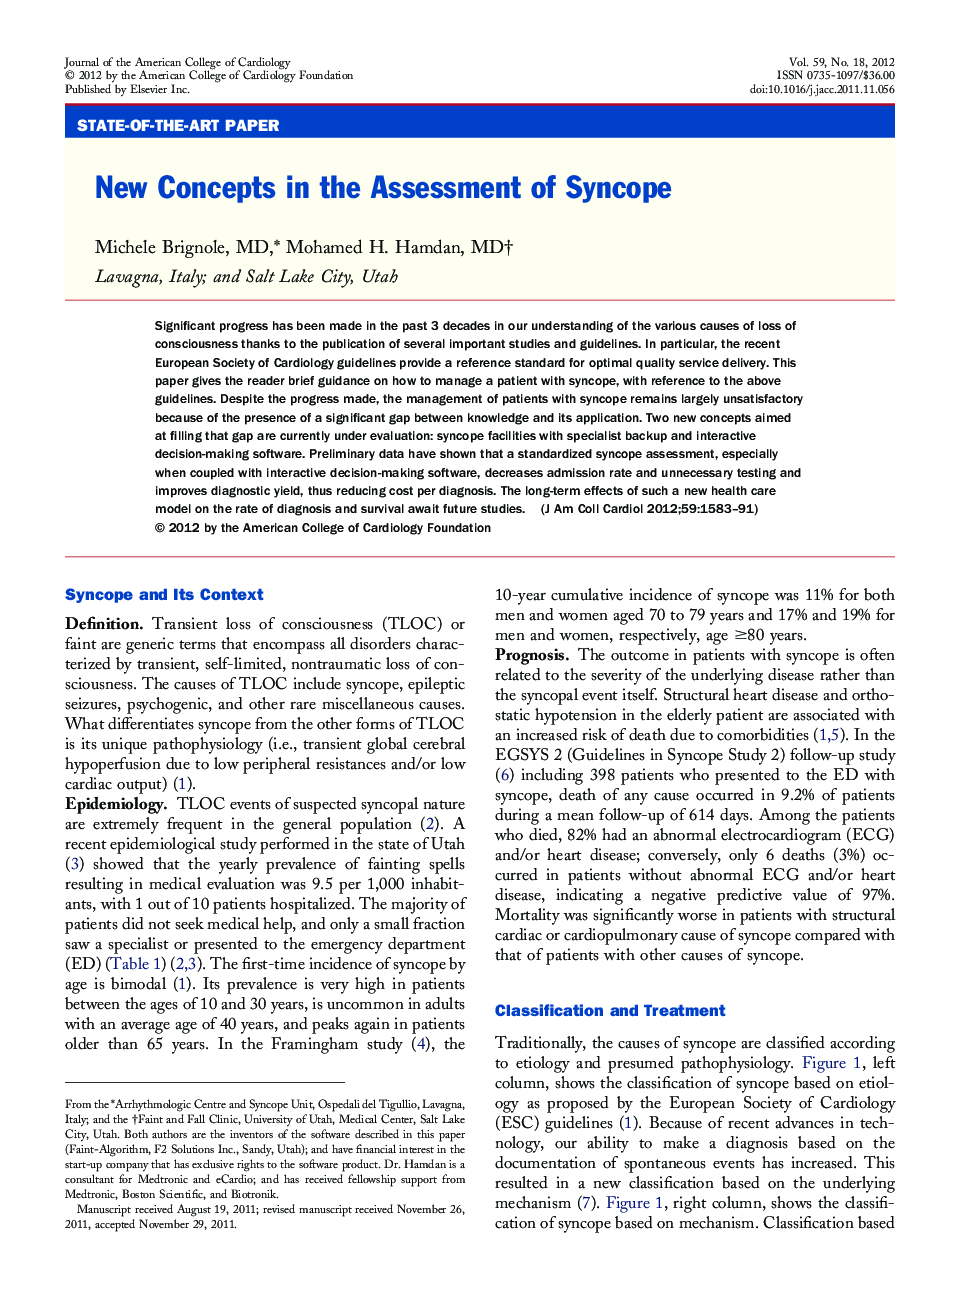 New Concepts in the Assessment of Syncope 